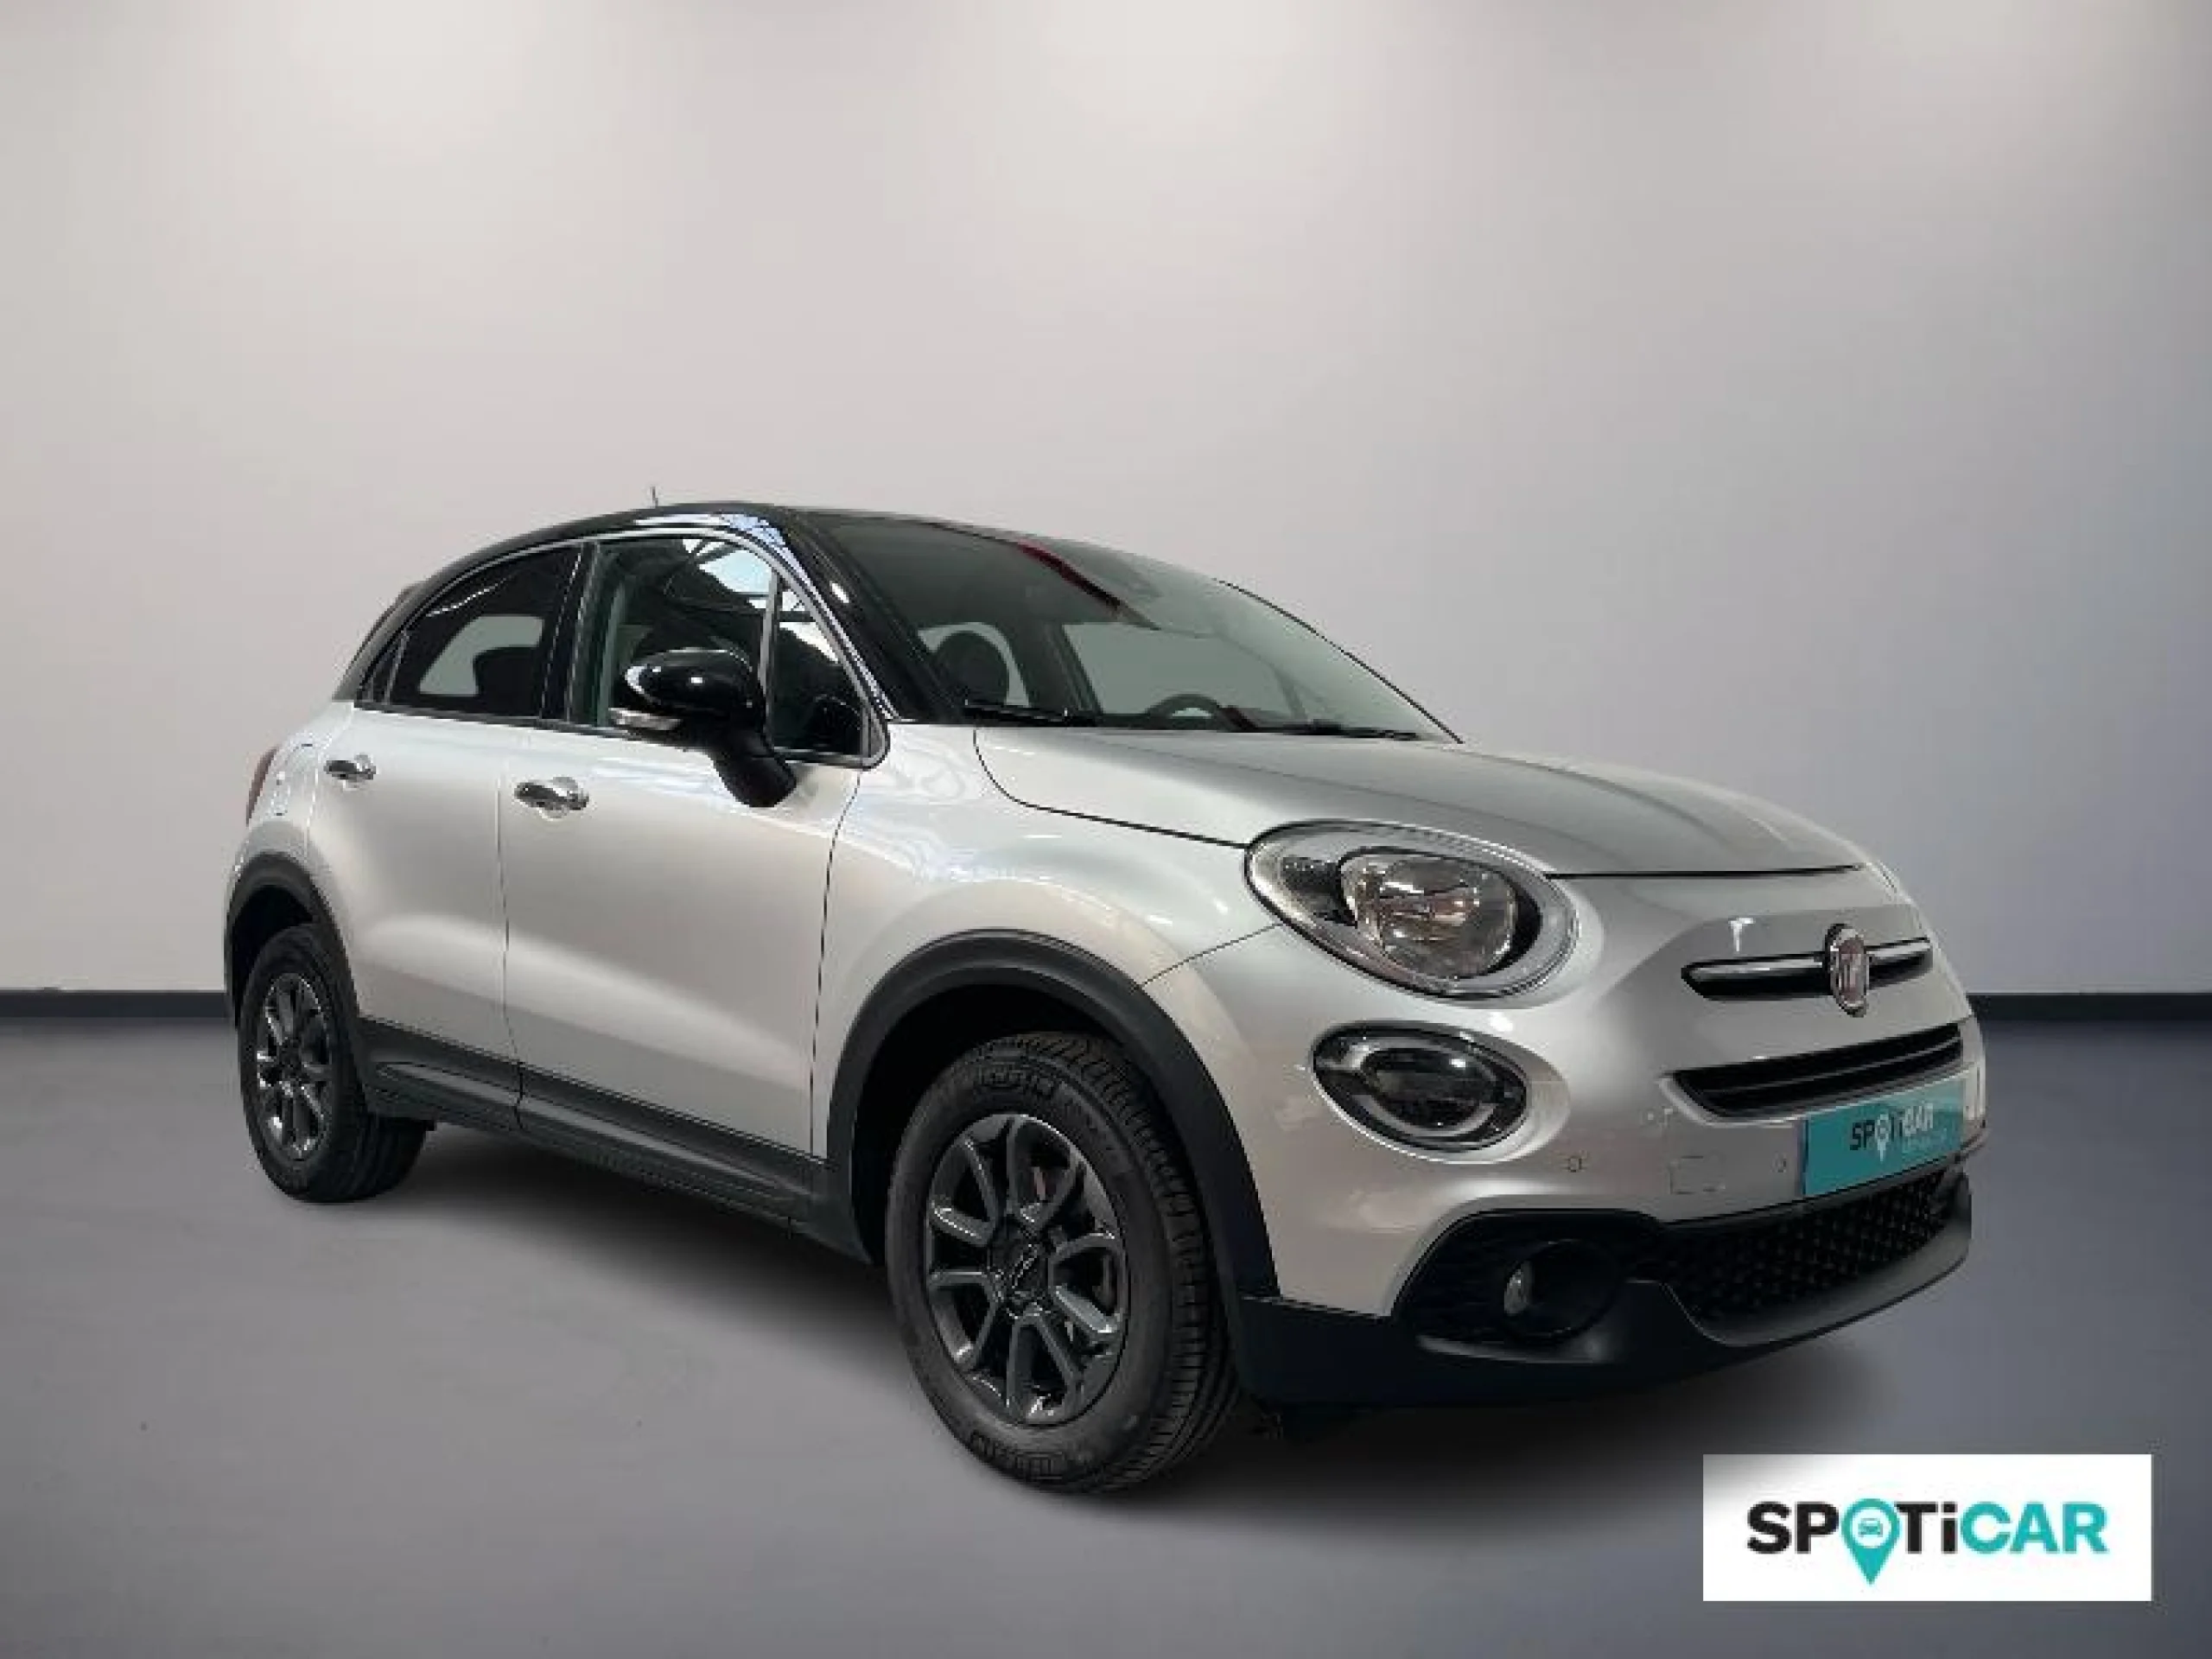 FIAT 500X CONNECT 1,0 FIREFLY T3 88KW (120 CV) S&S - Foto 1